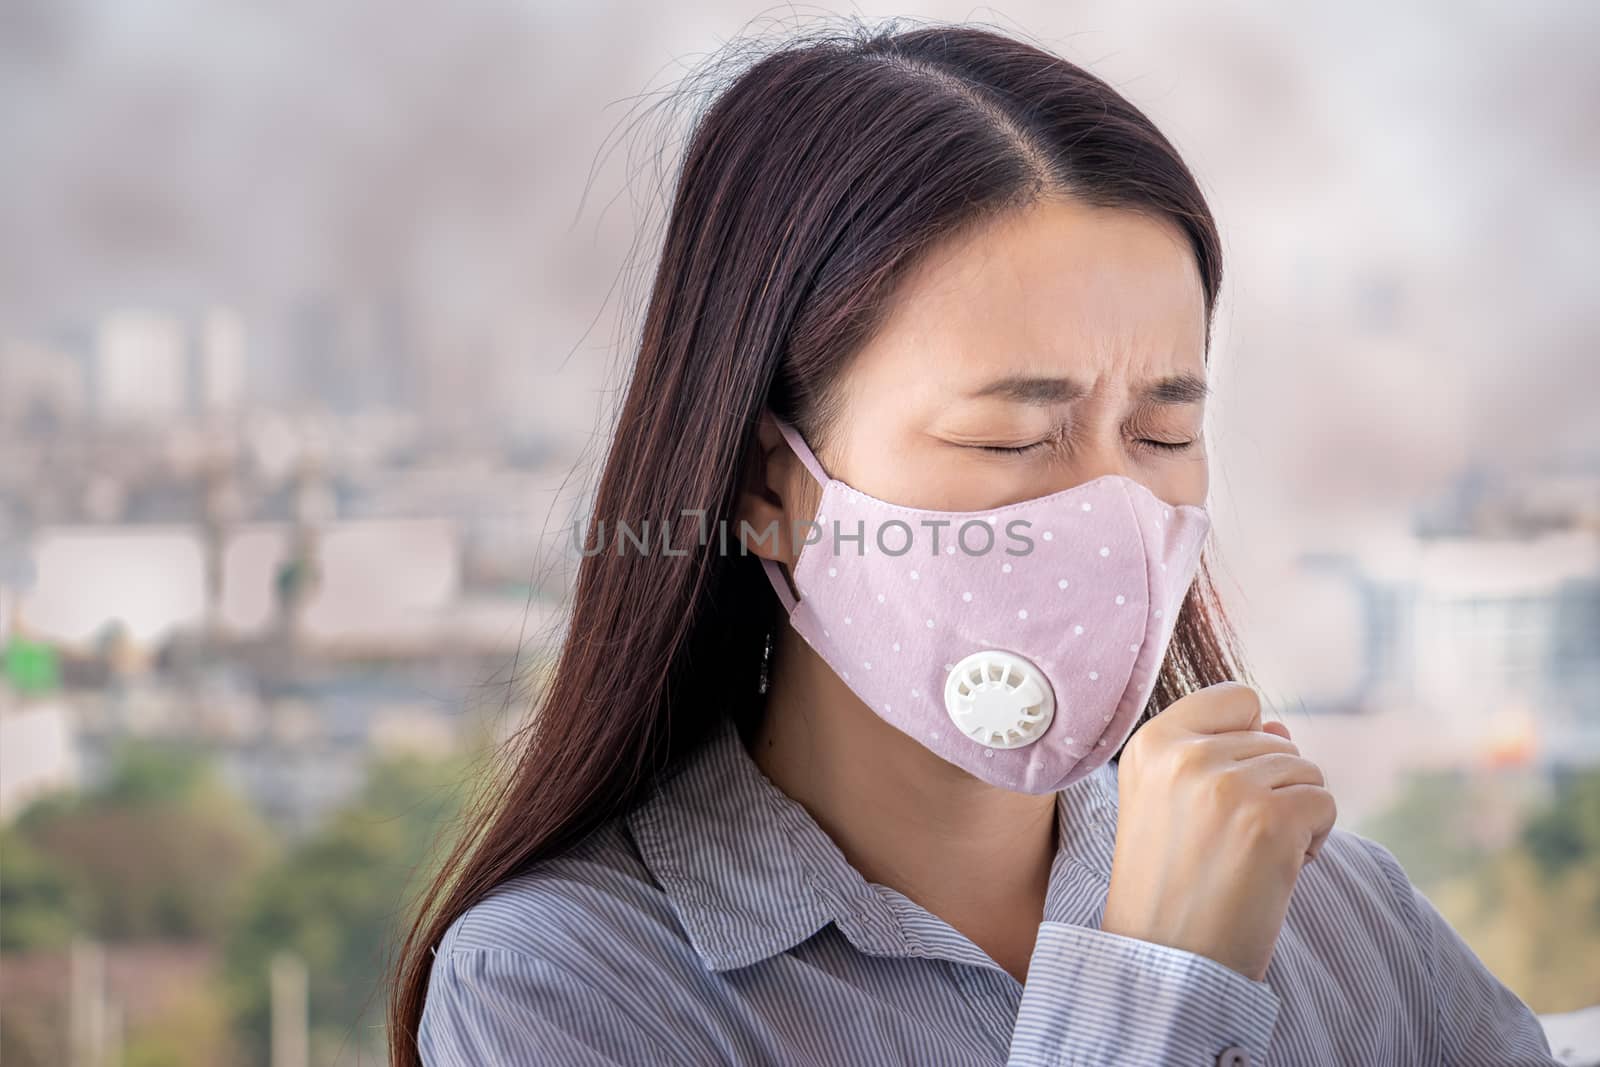 PM2.5. people feeling sick from air pollution, environment has harmful or poisonous effects. woman in the city wearing face mask to protect herself because level of pollution in the air is rising.